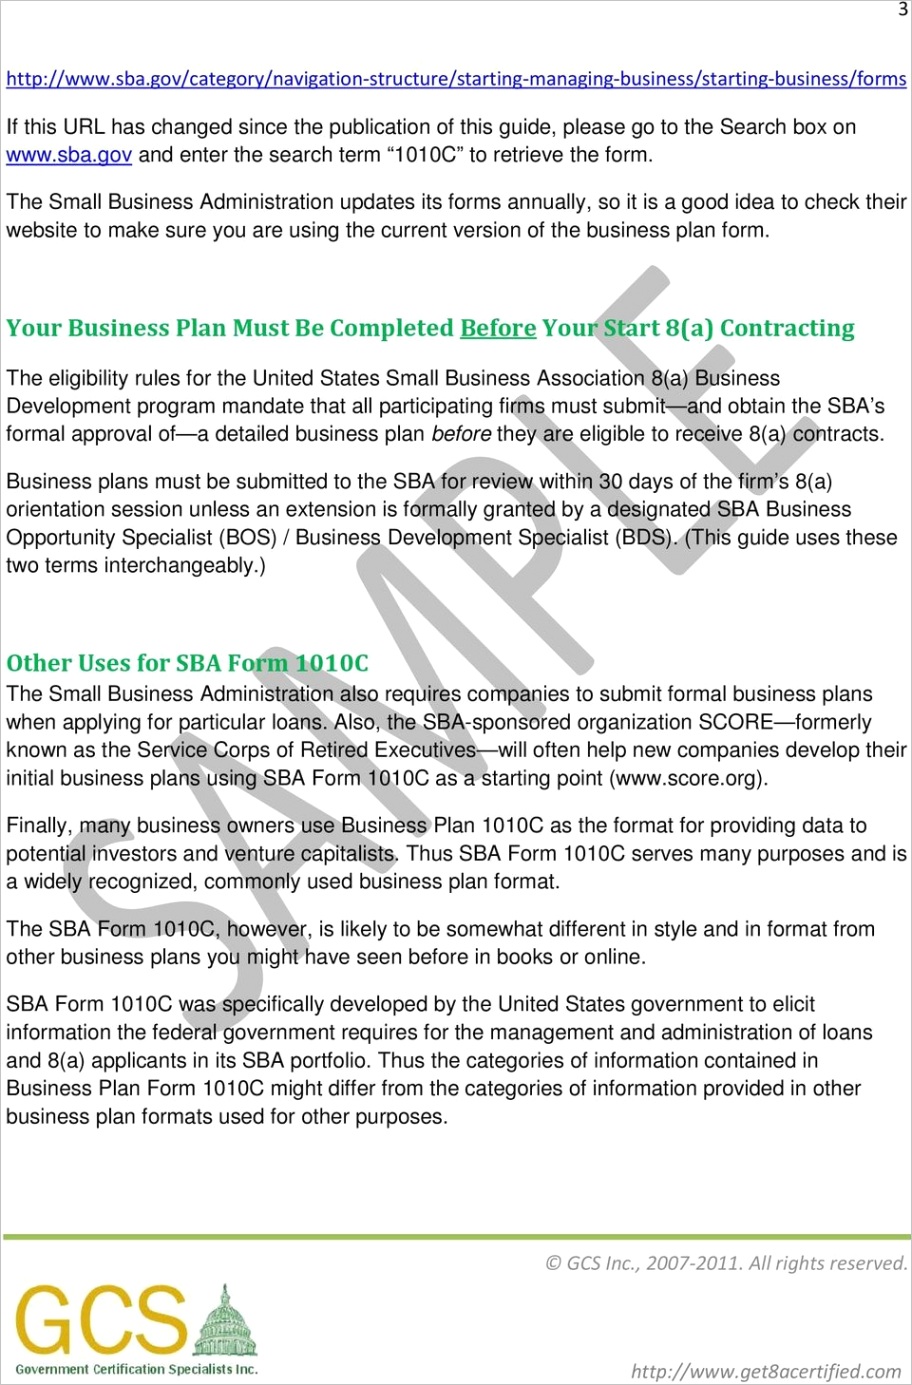 Small business administration sba business plan instruction guide for sba form 1010c